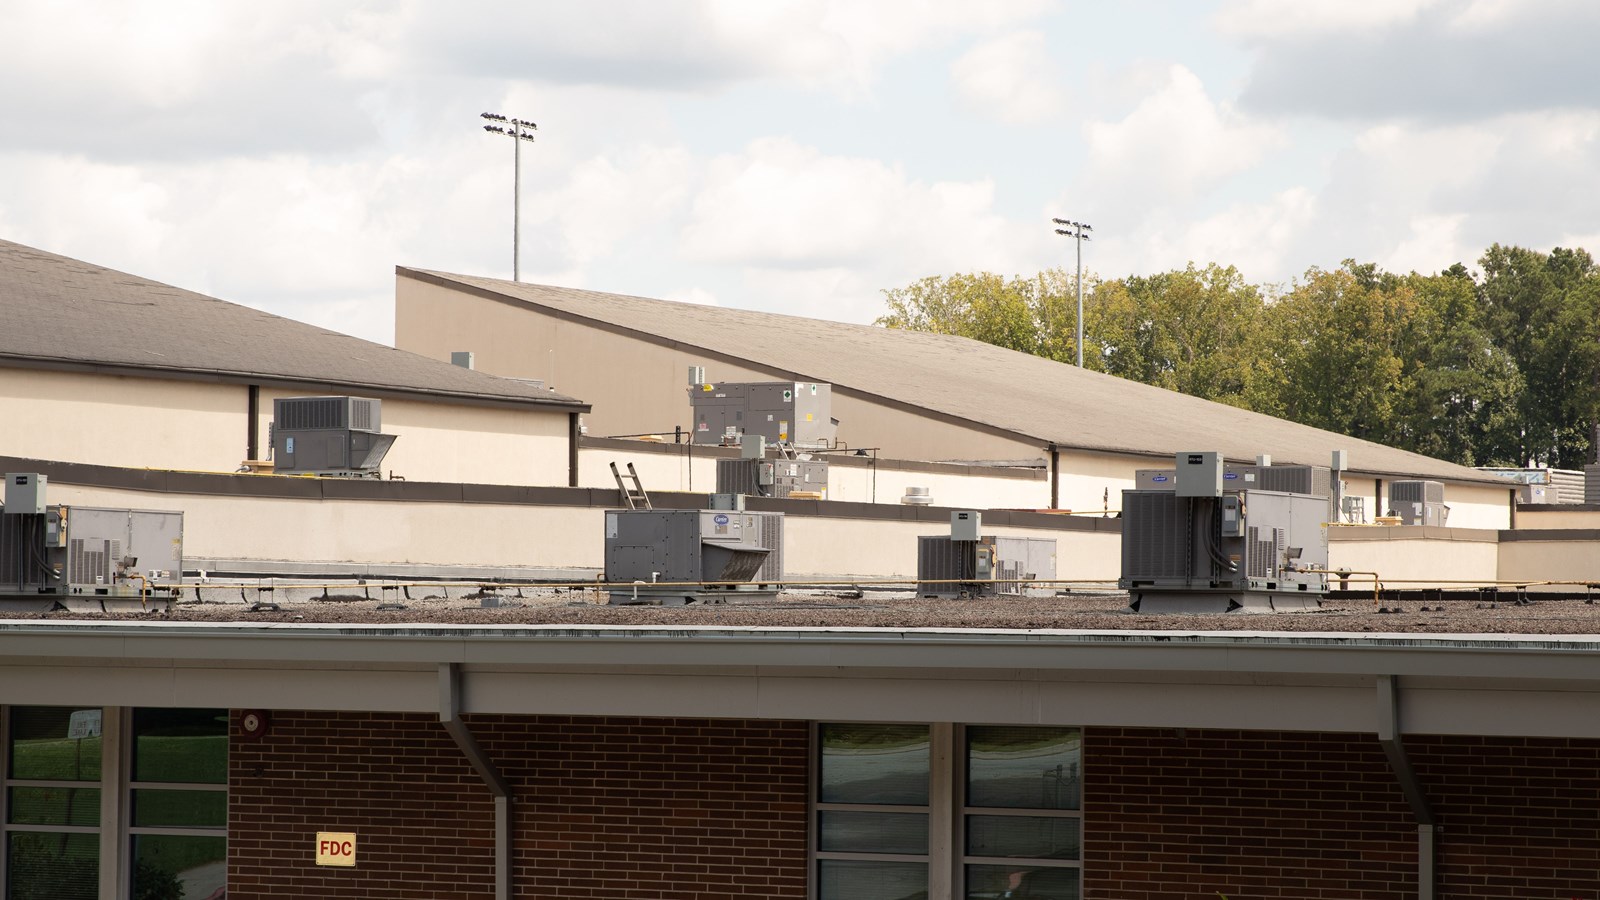 All schools eventually need infrastructure items, like HVAC systems, replaced.  